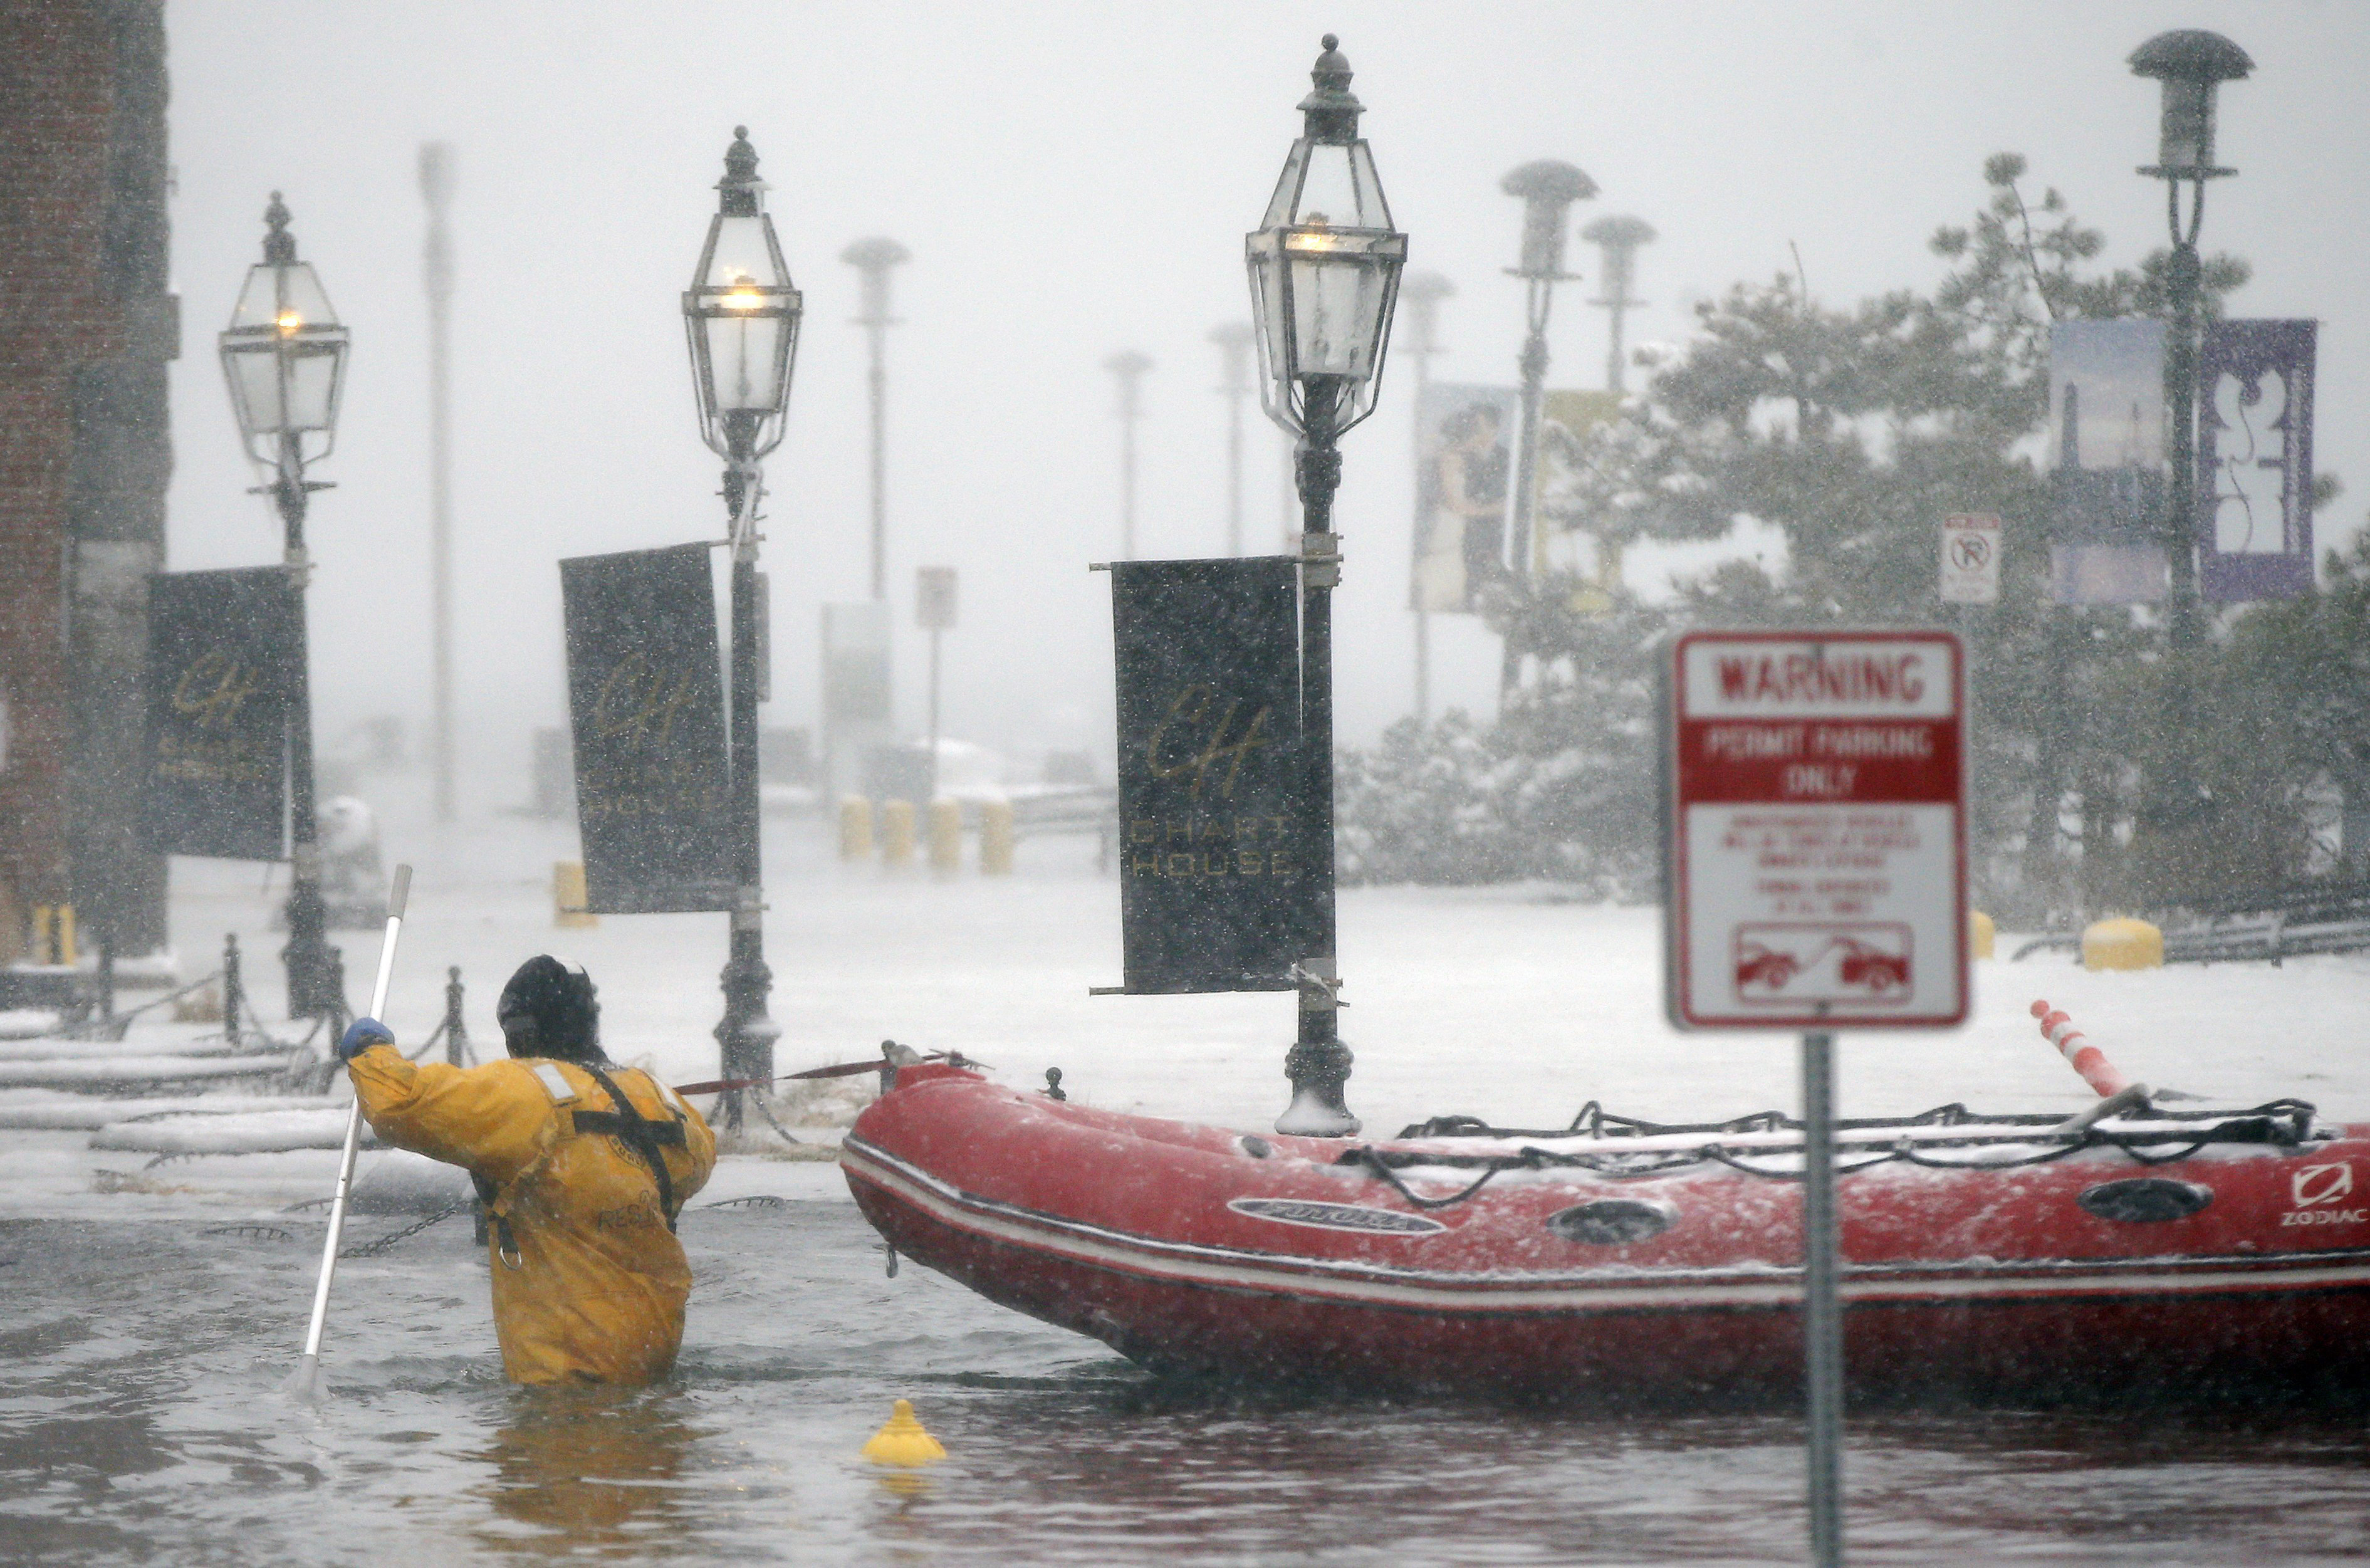 Massachusetts copes with flooding as Nor'easter batters coastal areas